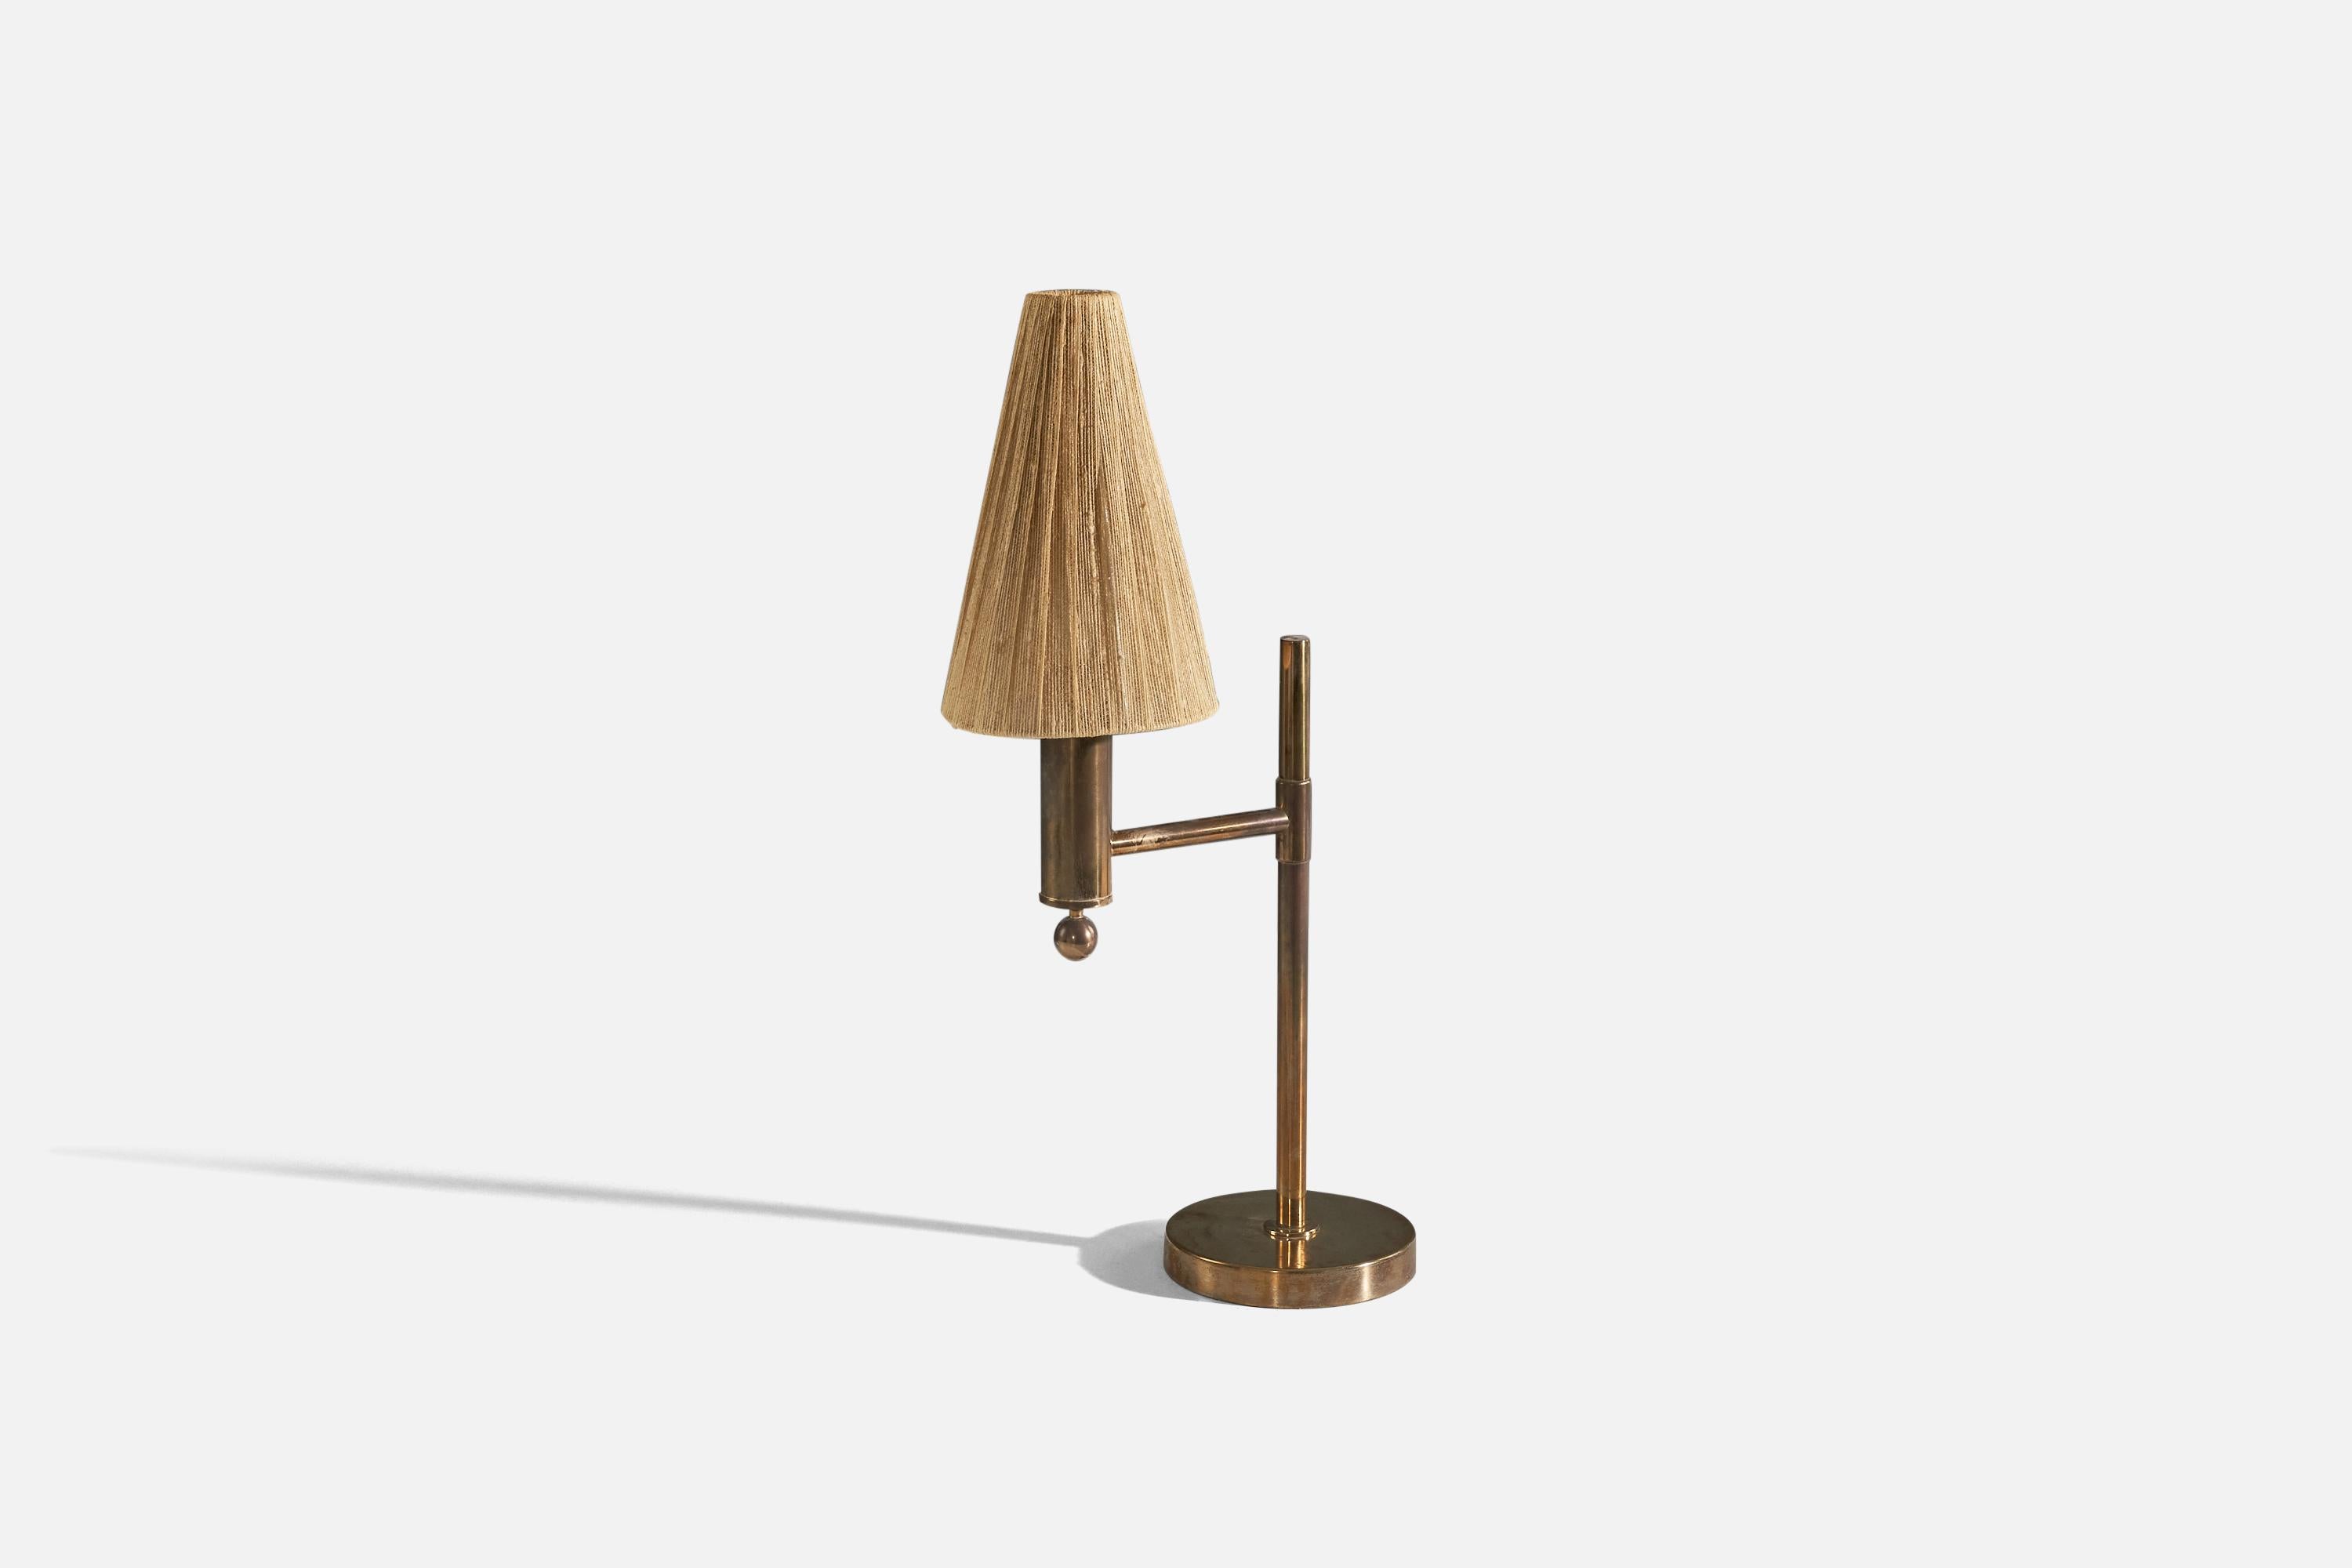 A brass and string table lamp designed and produced by Bergboms, Sweden, c. 1960s. 

Sold with lampshade. 
Dimensions of Lamp (inches) : 15.75 x 6.25 x 10.25 (H x W x D)
Dimensions of Shade (inches) : 2 x 6.25 x 9.75 (T x B x S)
Dimension of